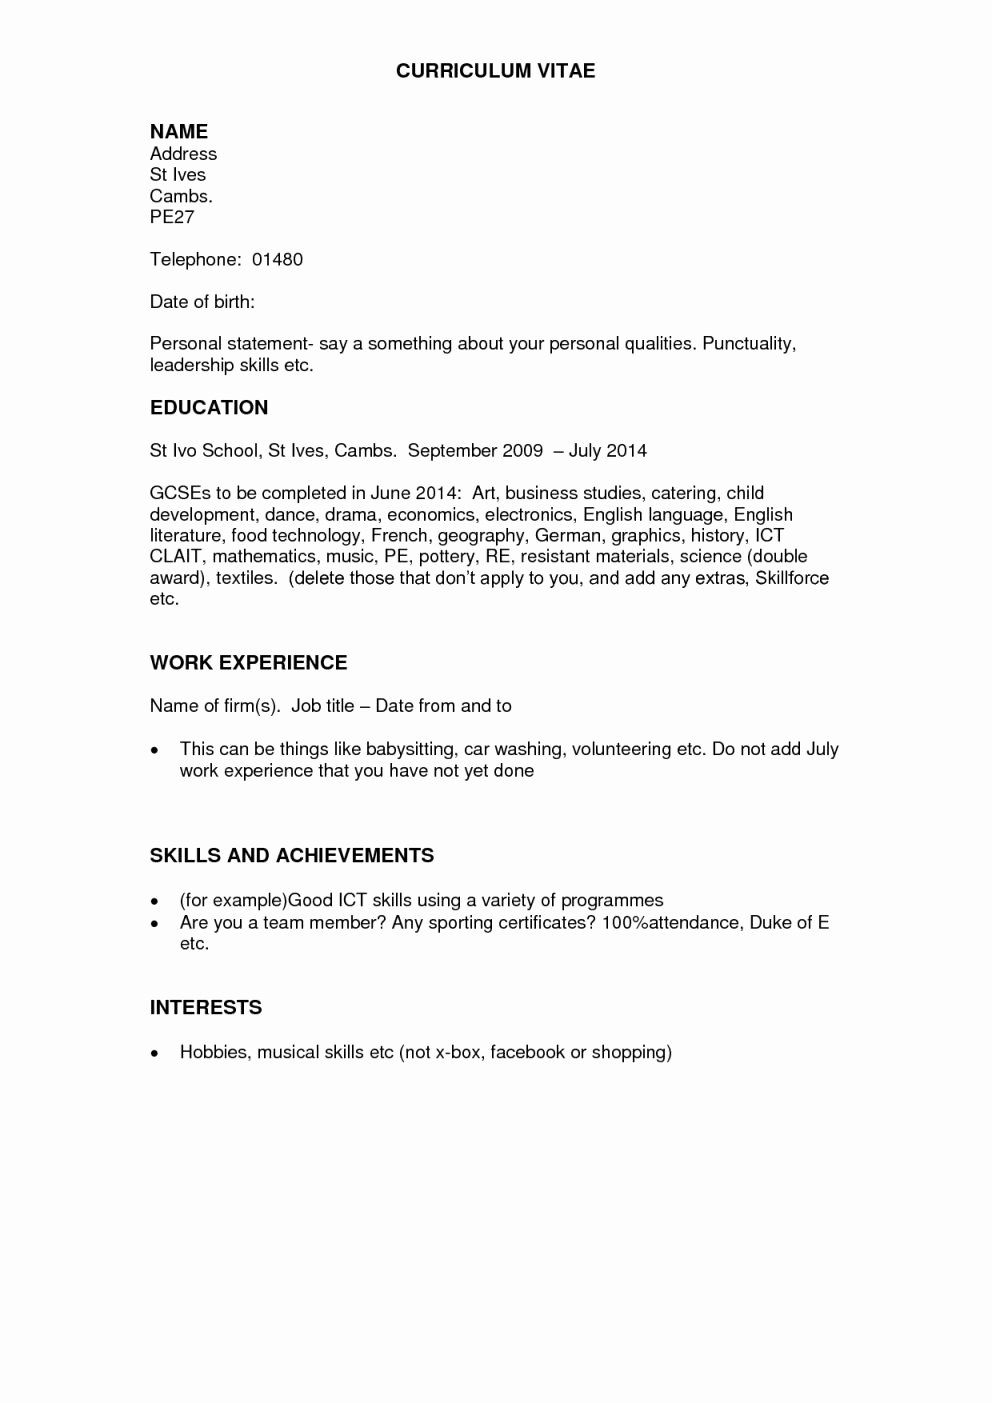 Example Personal Statements for Cv No Work Experience